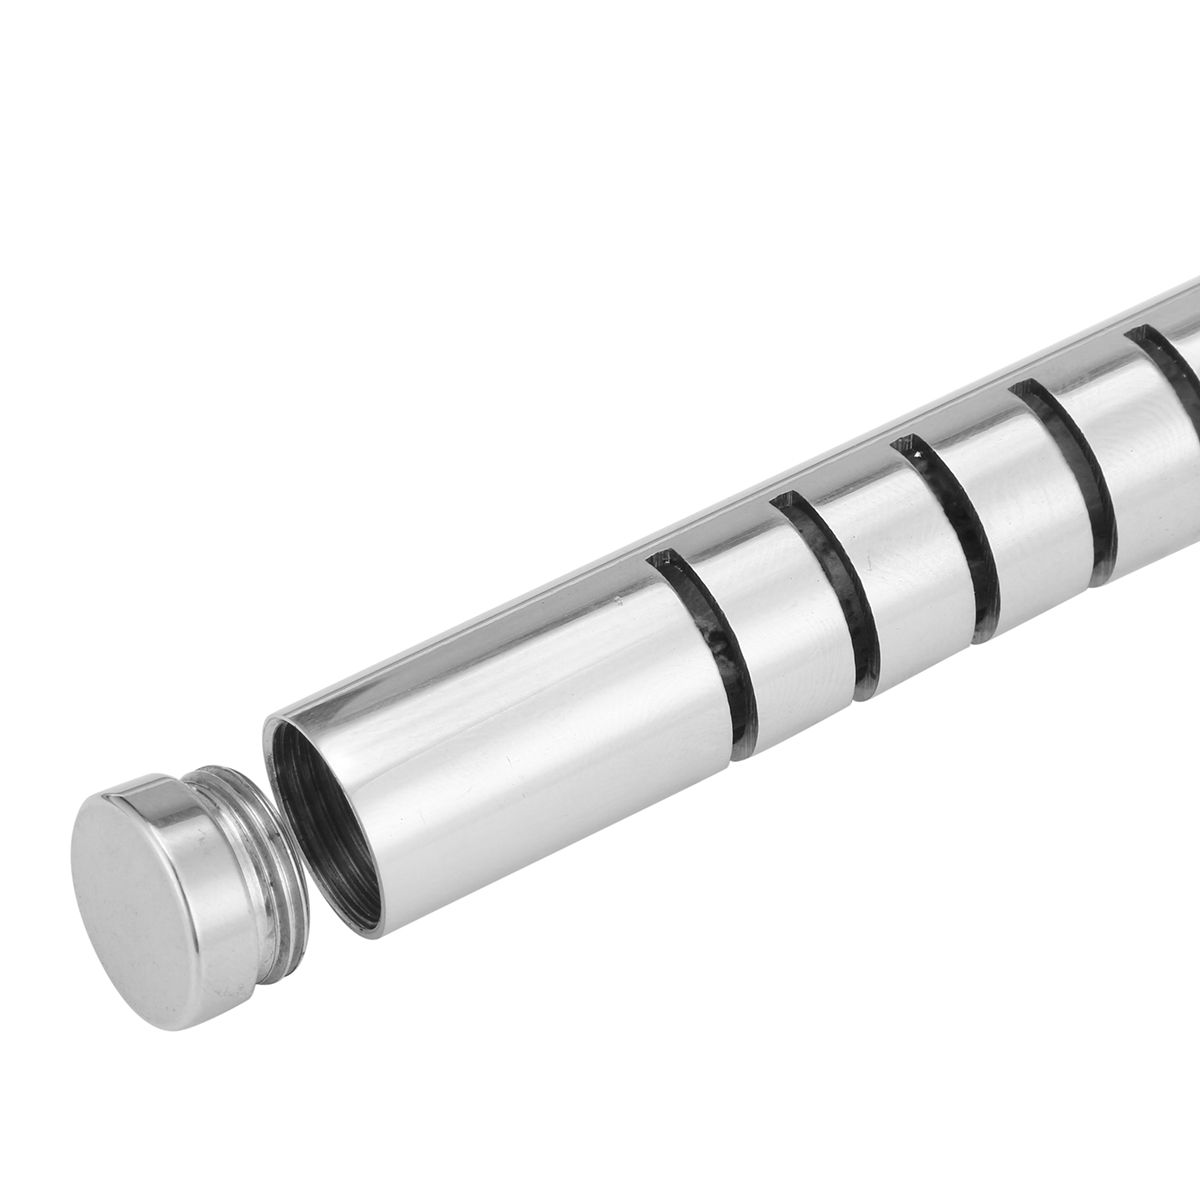 16mm-Aquarium-Fish-Tank-Filter-Tube-Stainless-Steel-Inflow-Outflow-Pipes-1273935